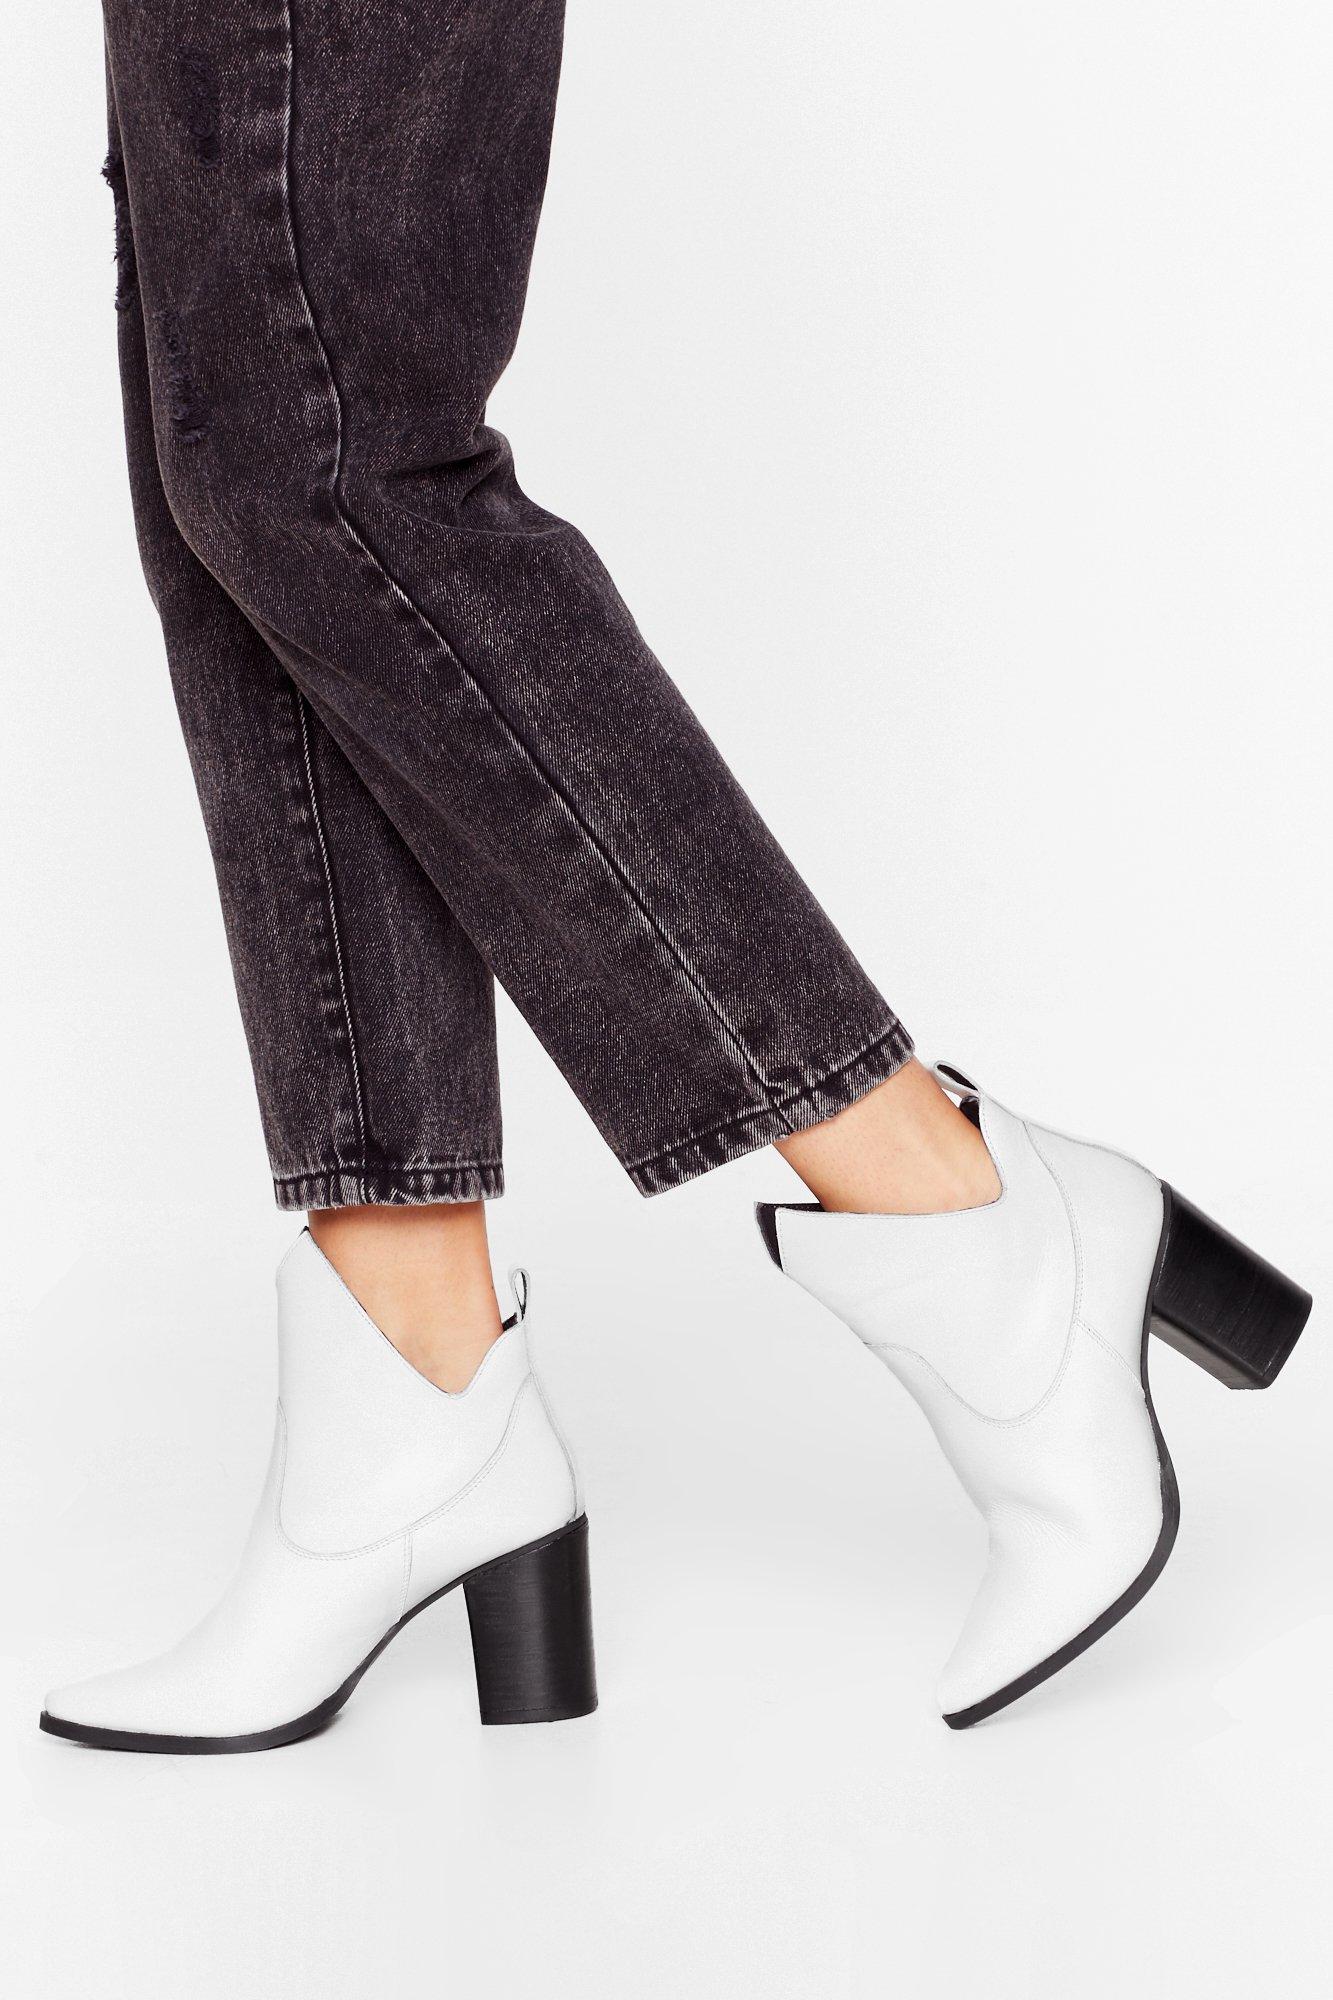 over the ankle boots